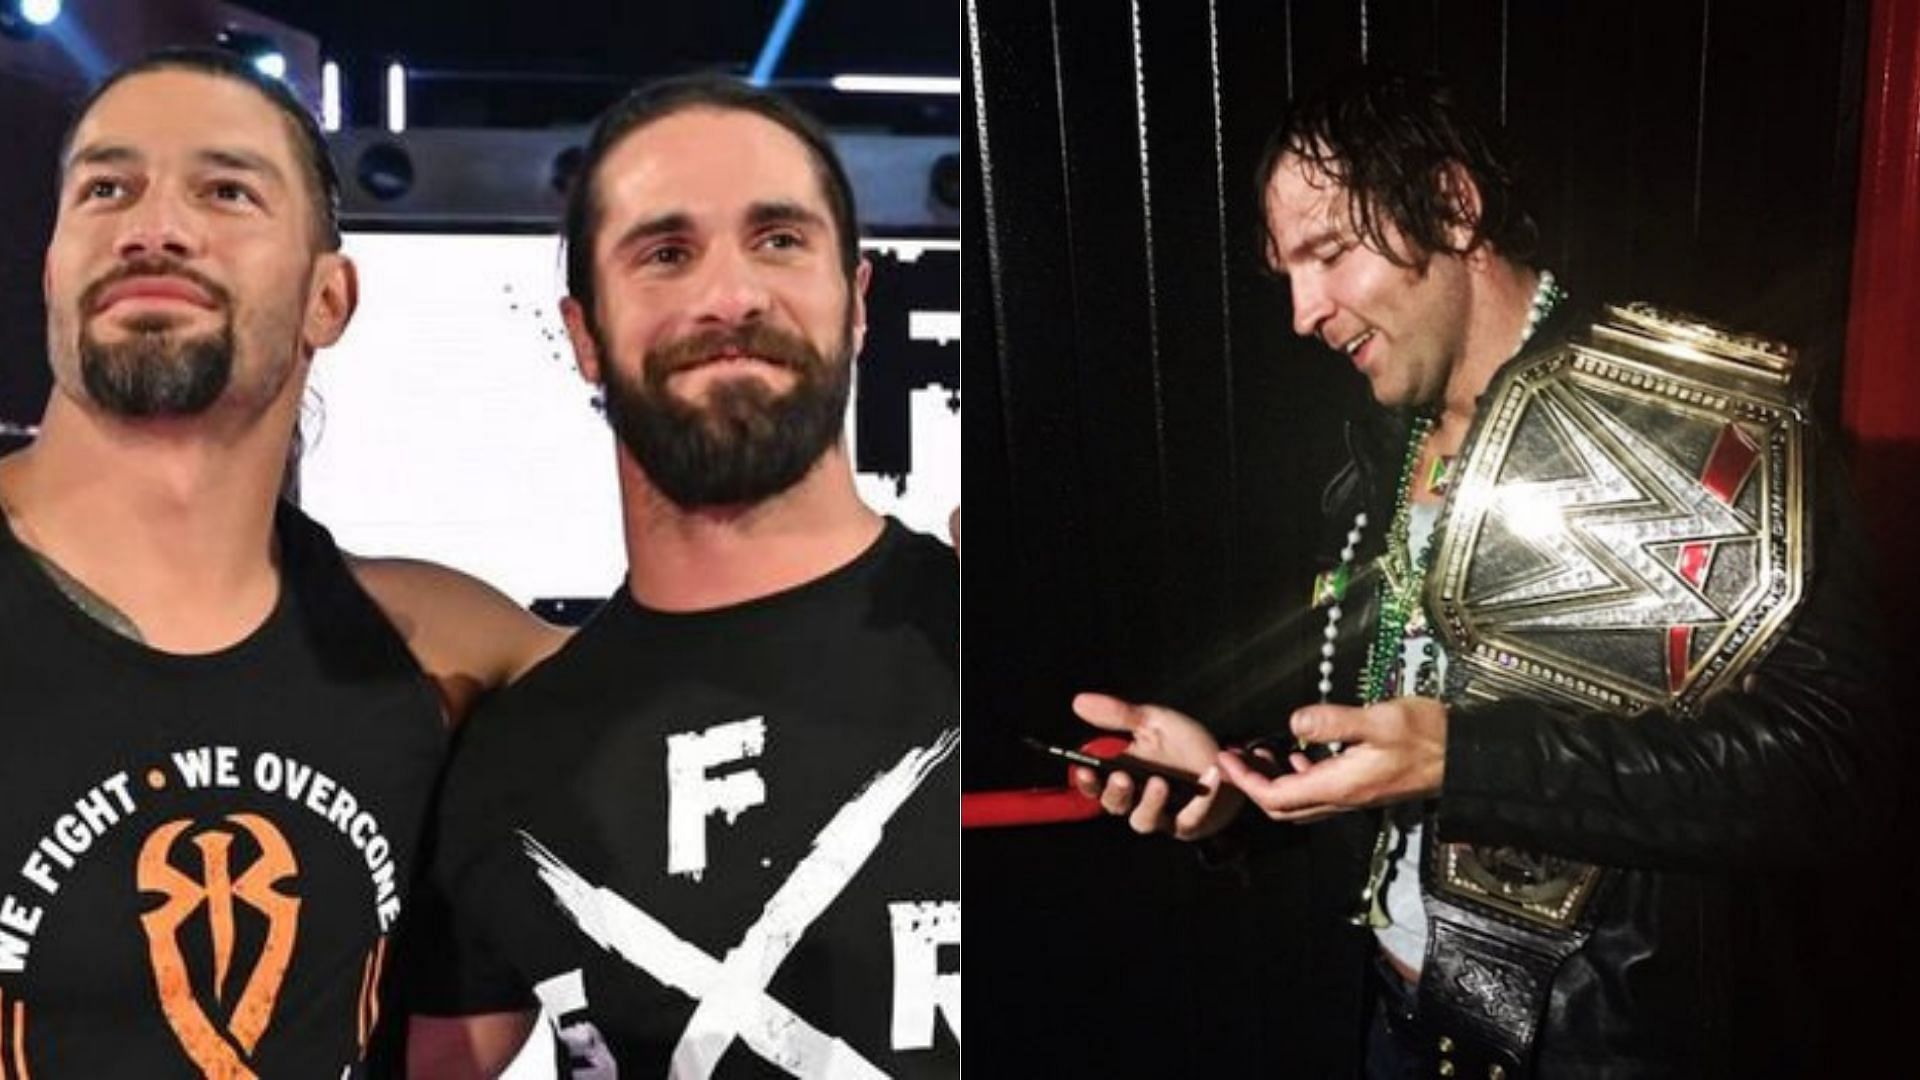 Roman Reigns and Seth Rollins (left); Dean Ambrose/Jon Moxley (right)